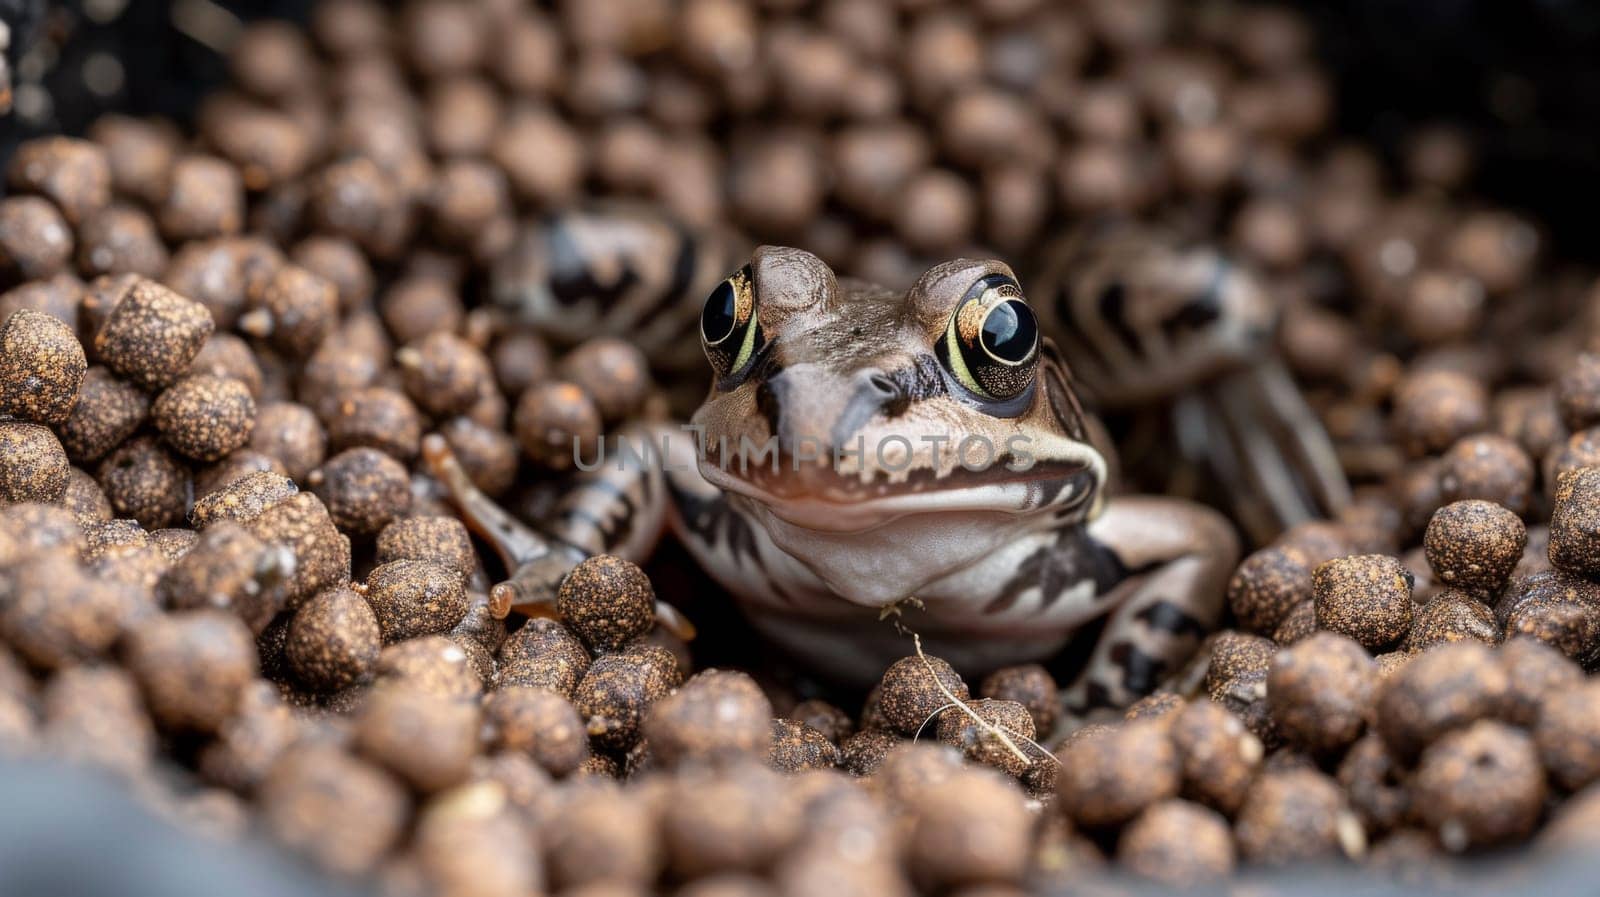 A frog sitting in a bowl of balls with its eyes open, AI by starush